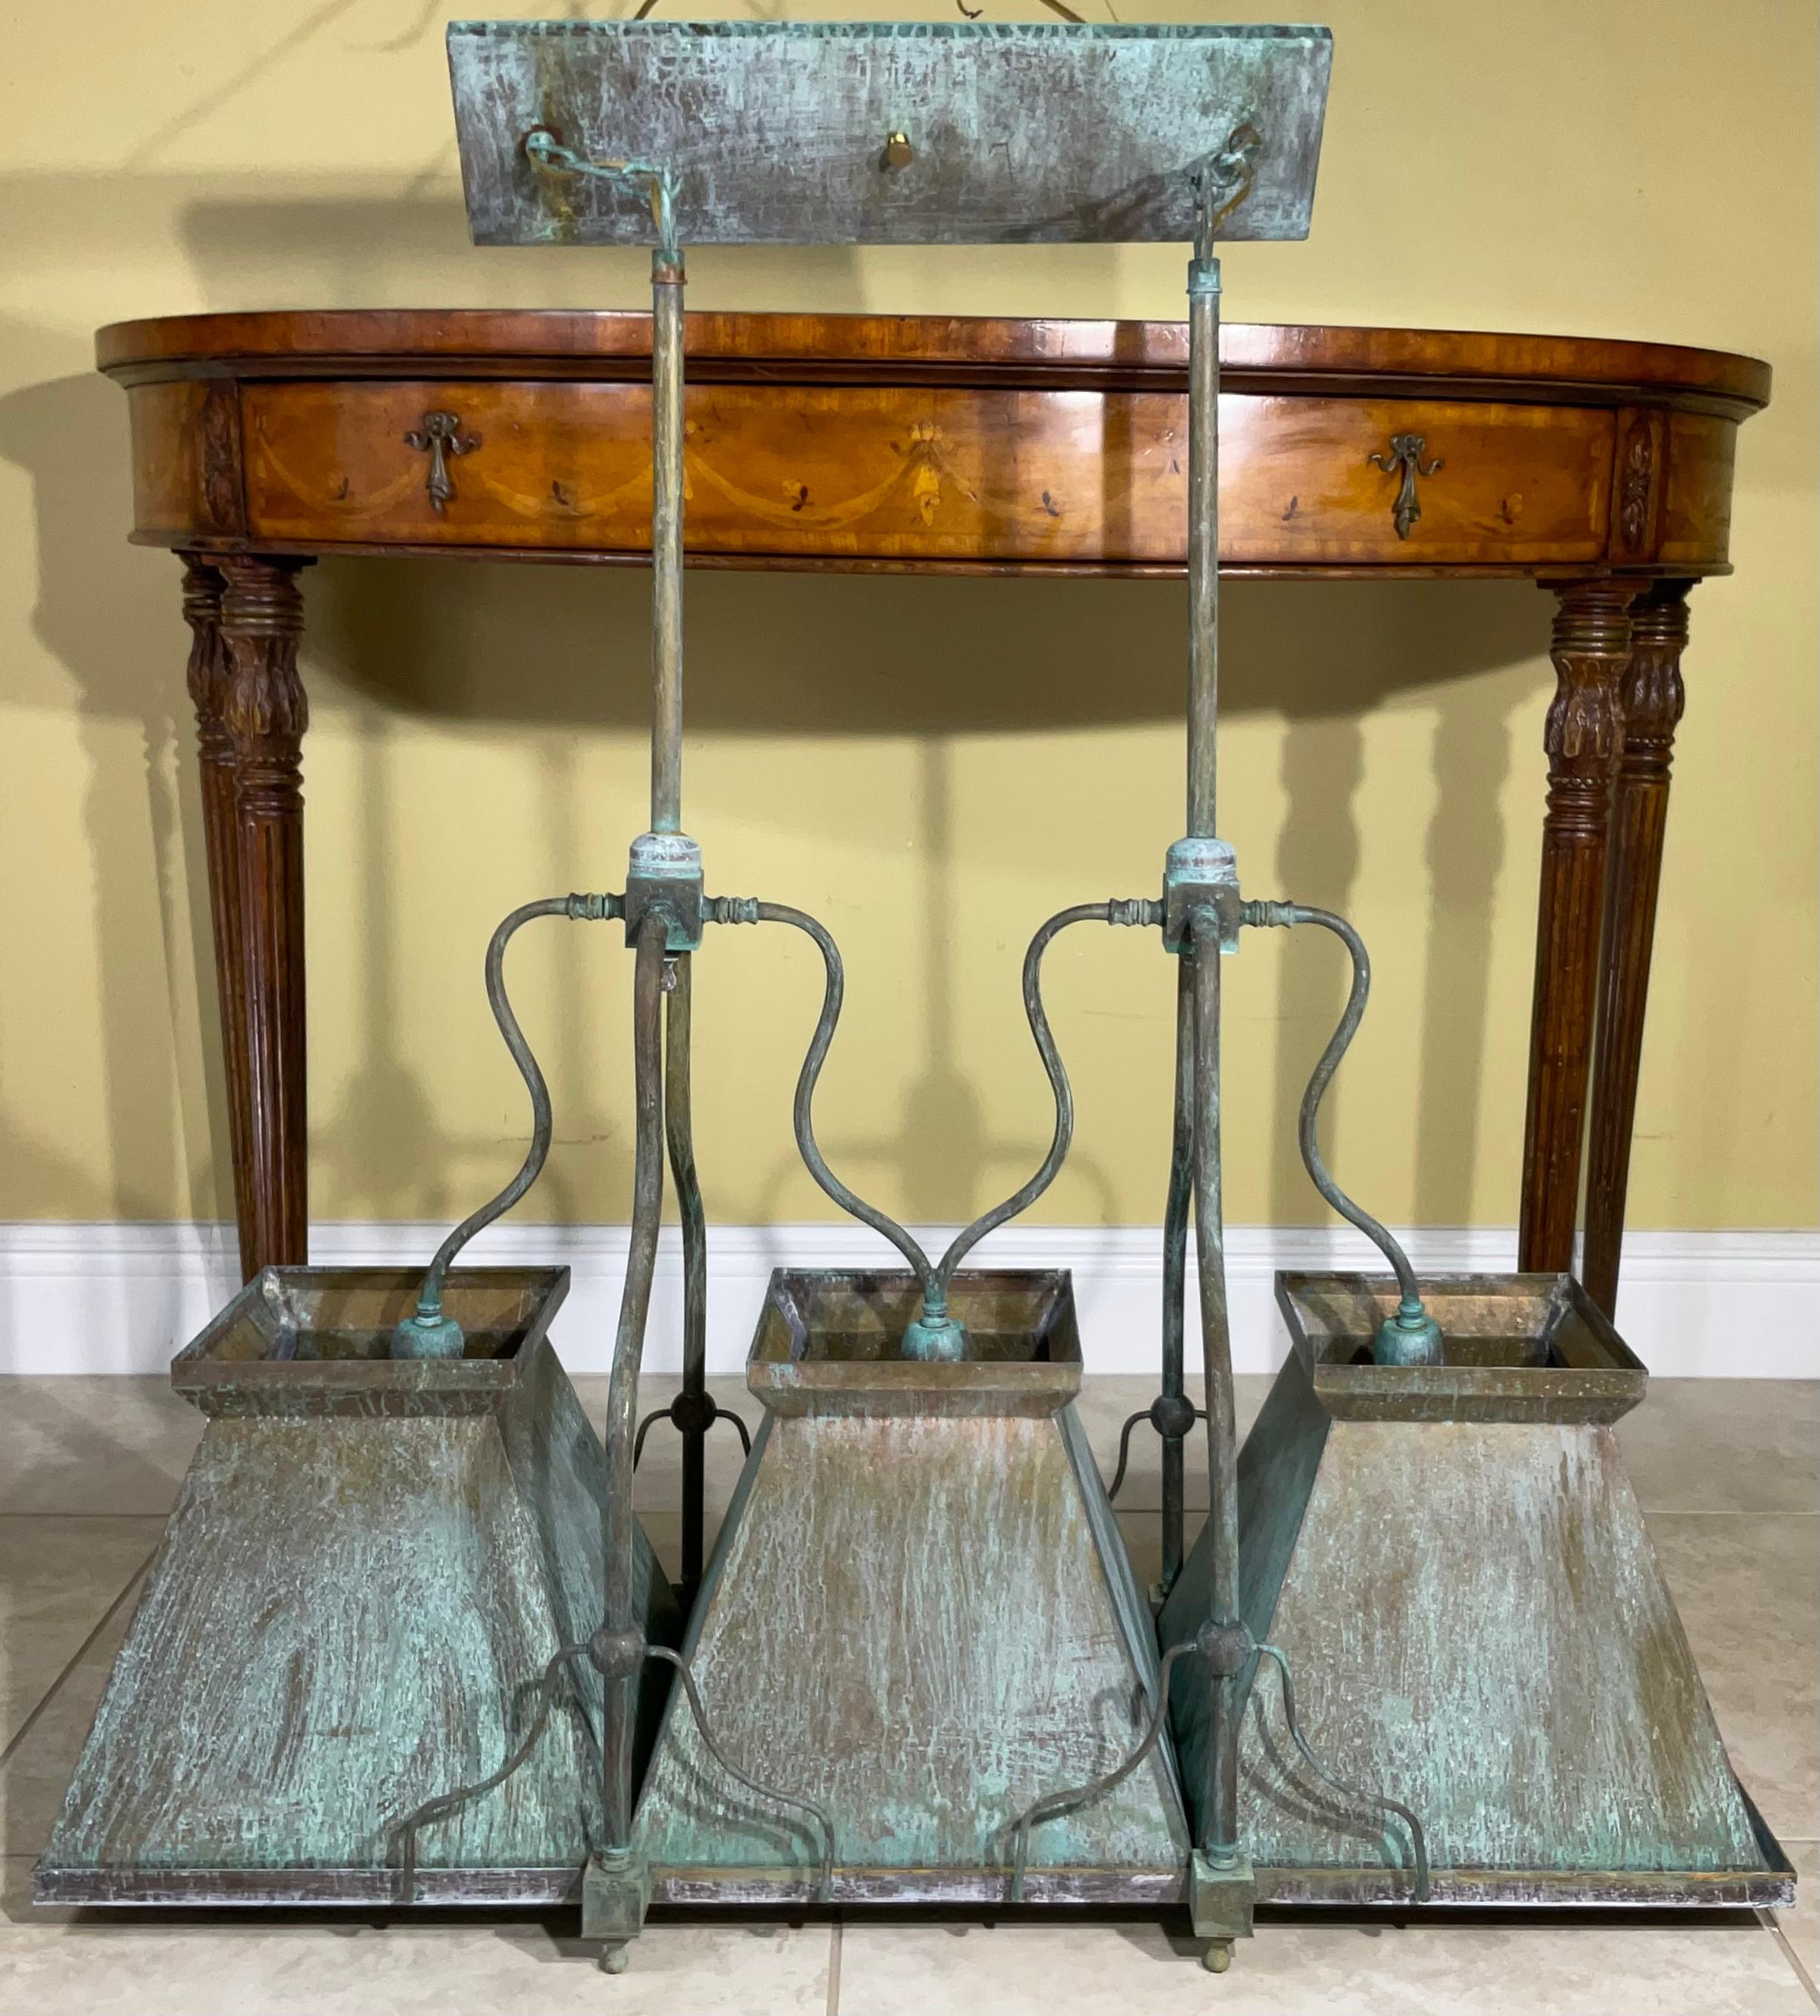 Hand crafted light fixture made of solid brass with three made shades, great greenish rustic patina Looks great over a kitchen island, dining table or in a billiard room. wired and ready to use each shade has one 60/watt light . Original canopy